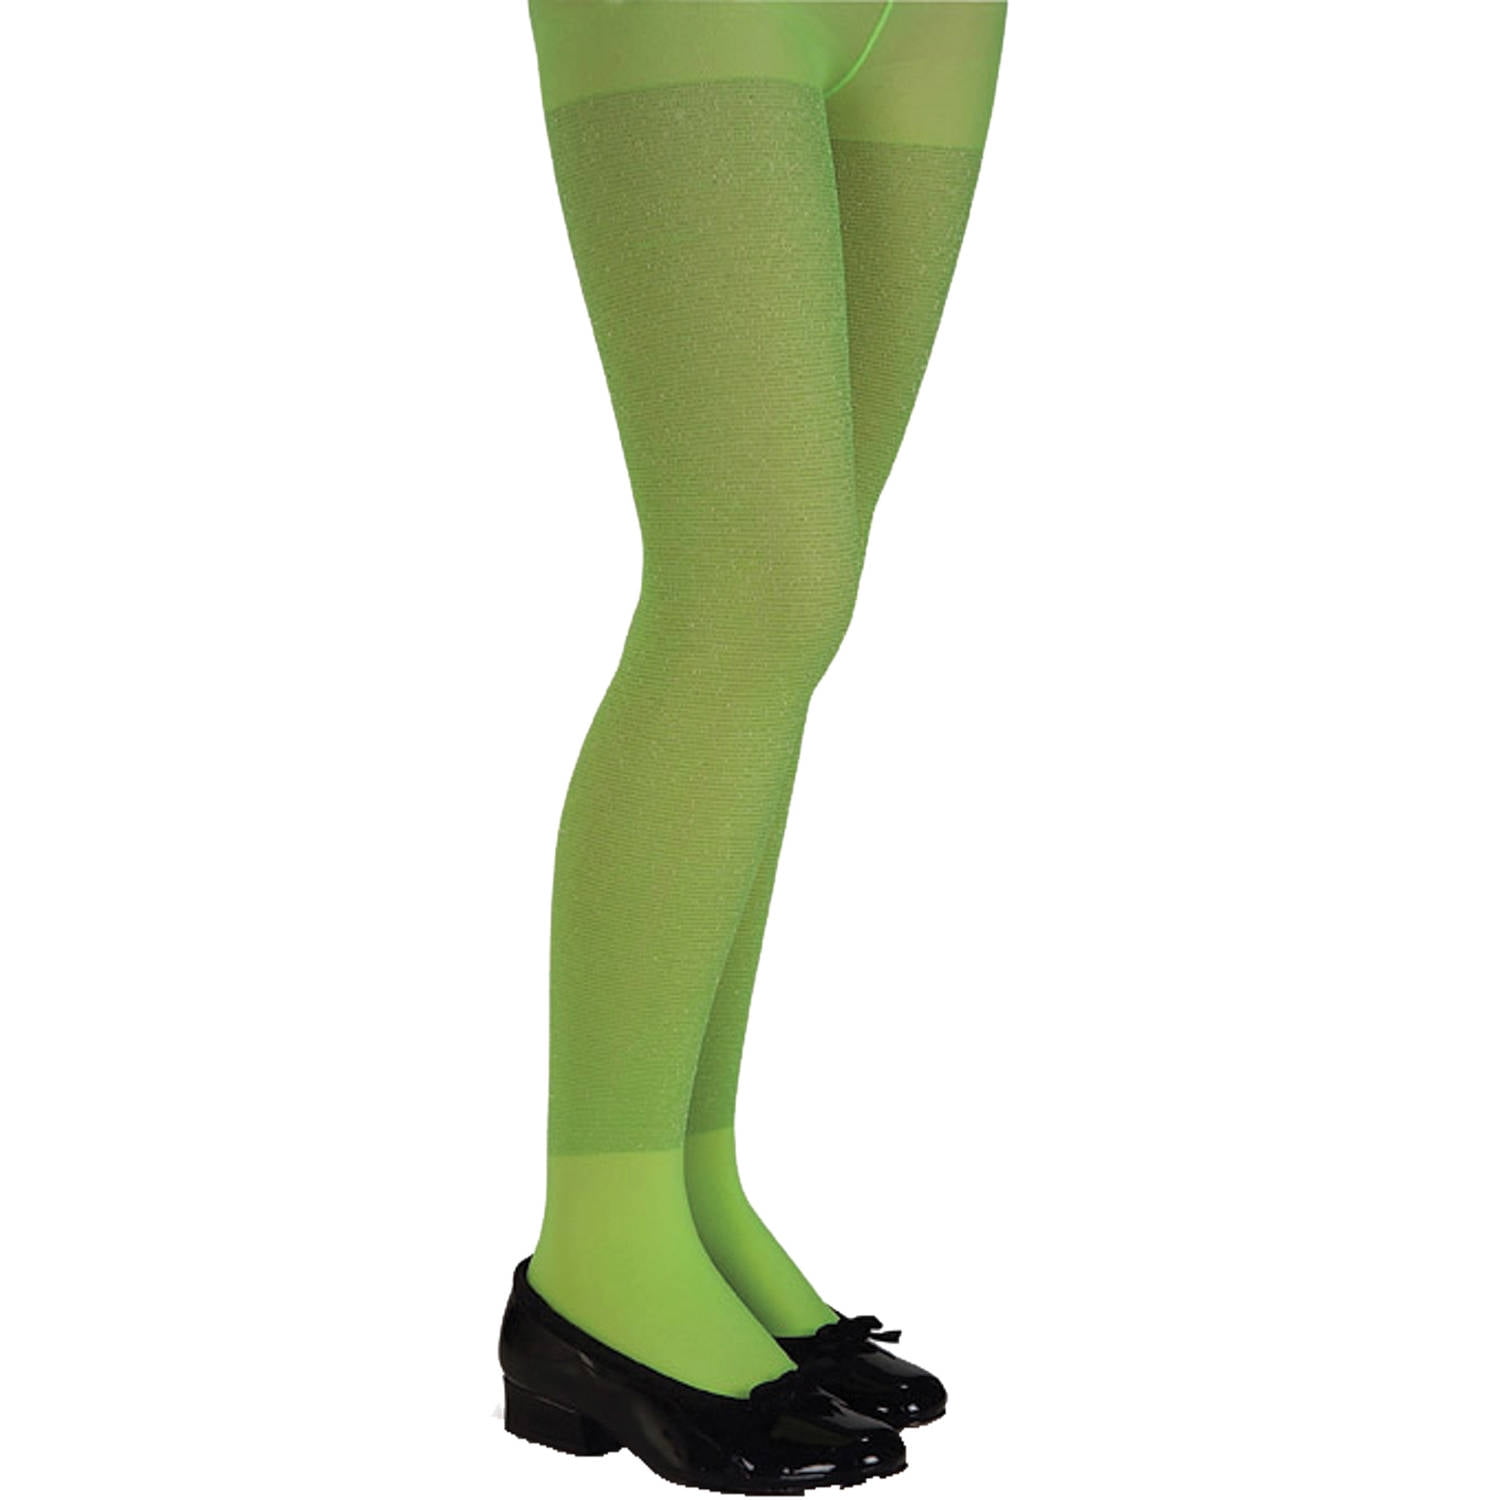 Womens Lime Green Tights Halloween Costume Accessory